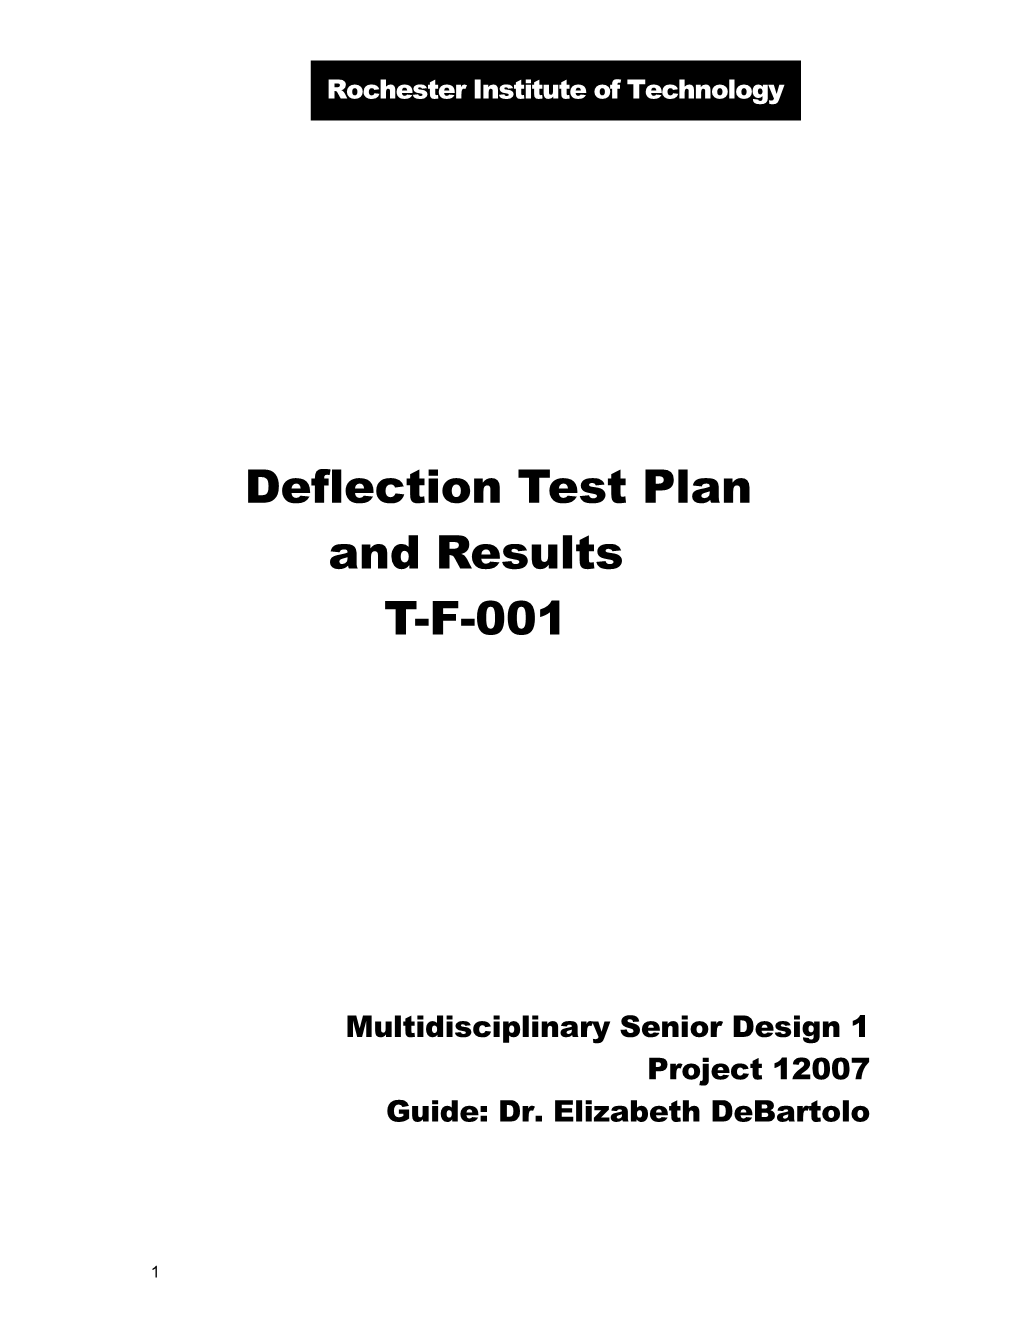 Deflection Test Plan and Results T-F-001